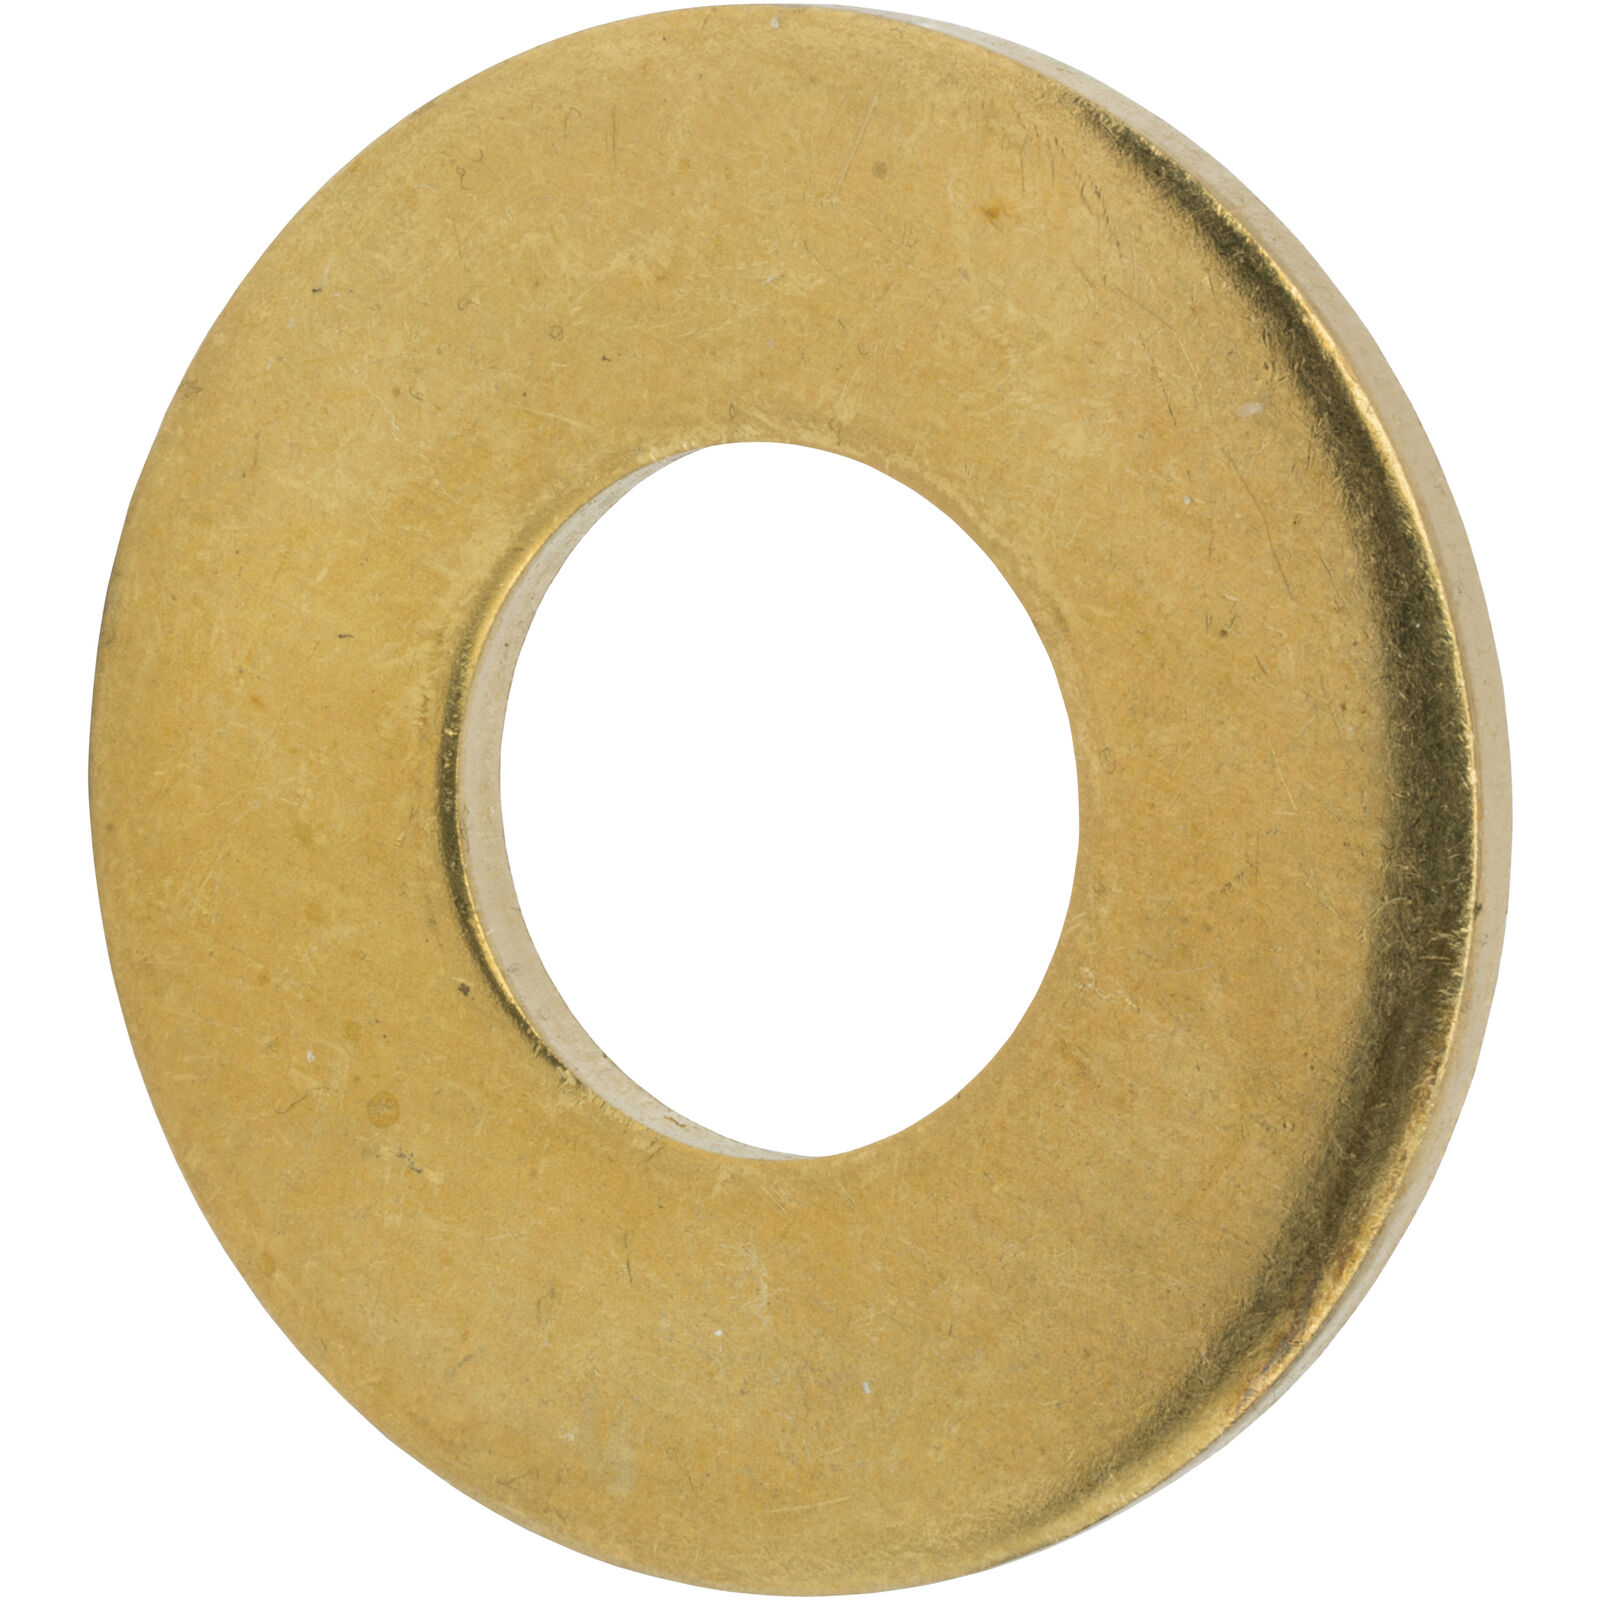 #10 Flat Washers, Solid Brass, Commercial Standard, Quantity 250